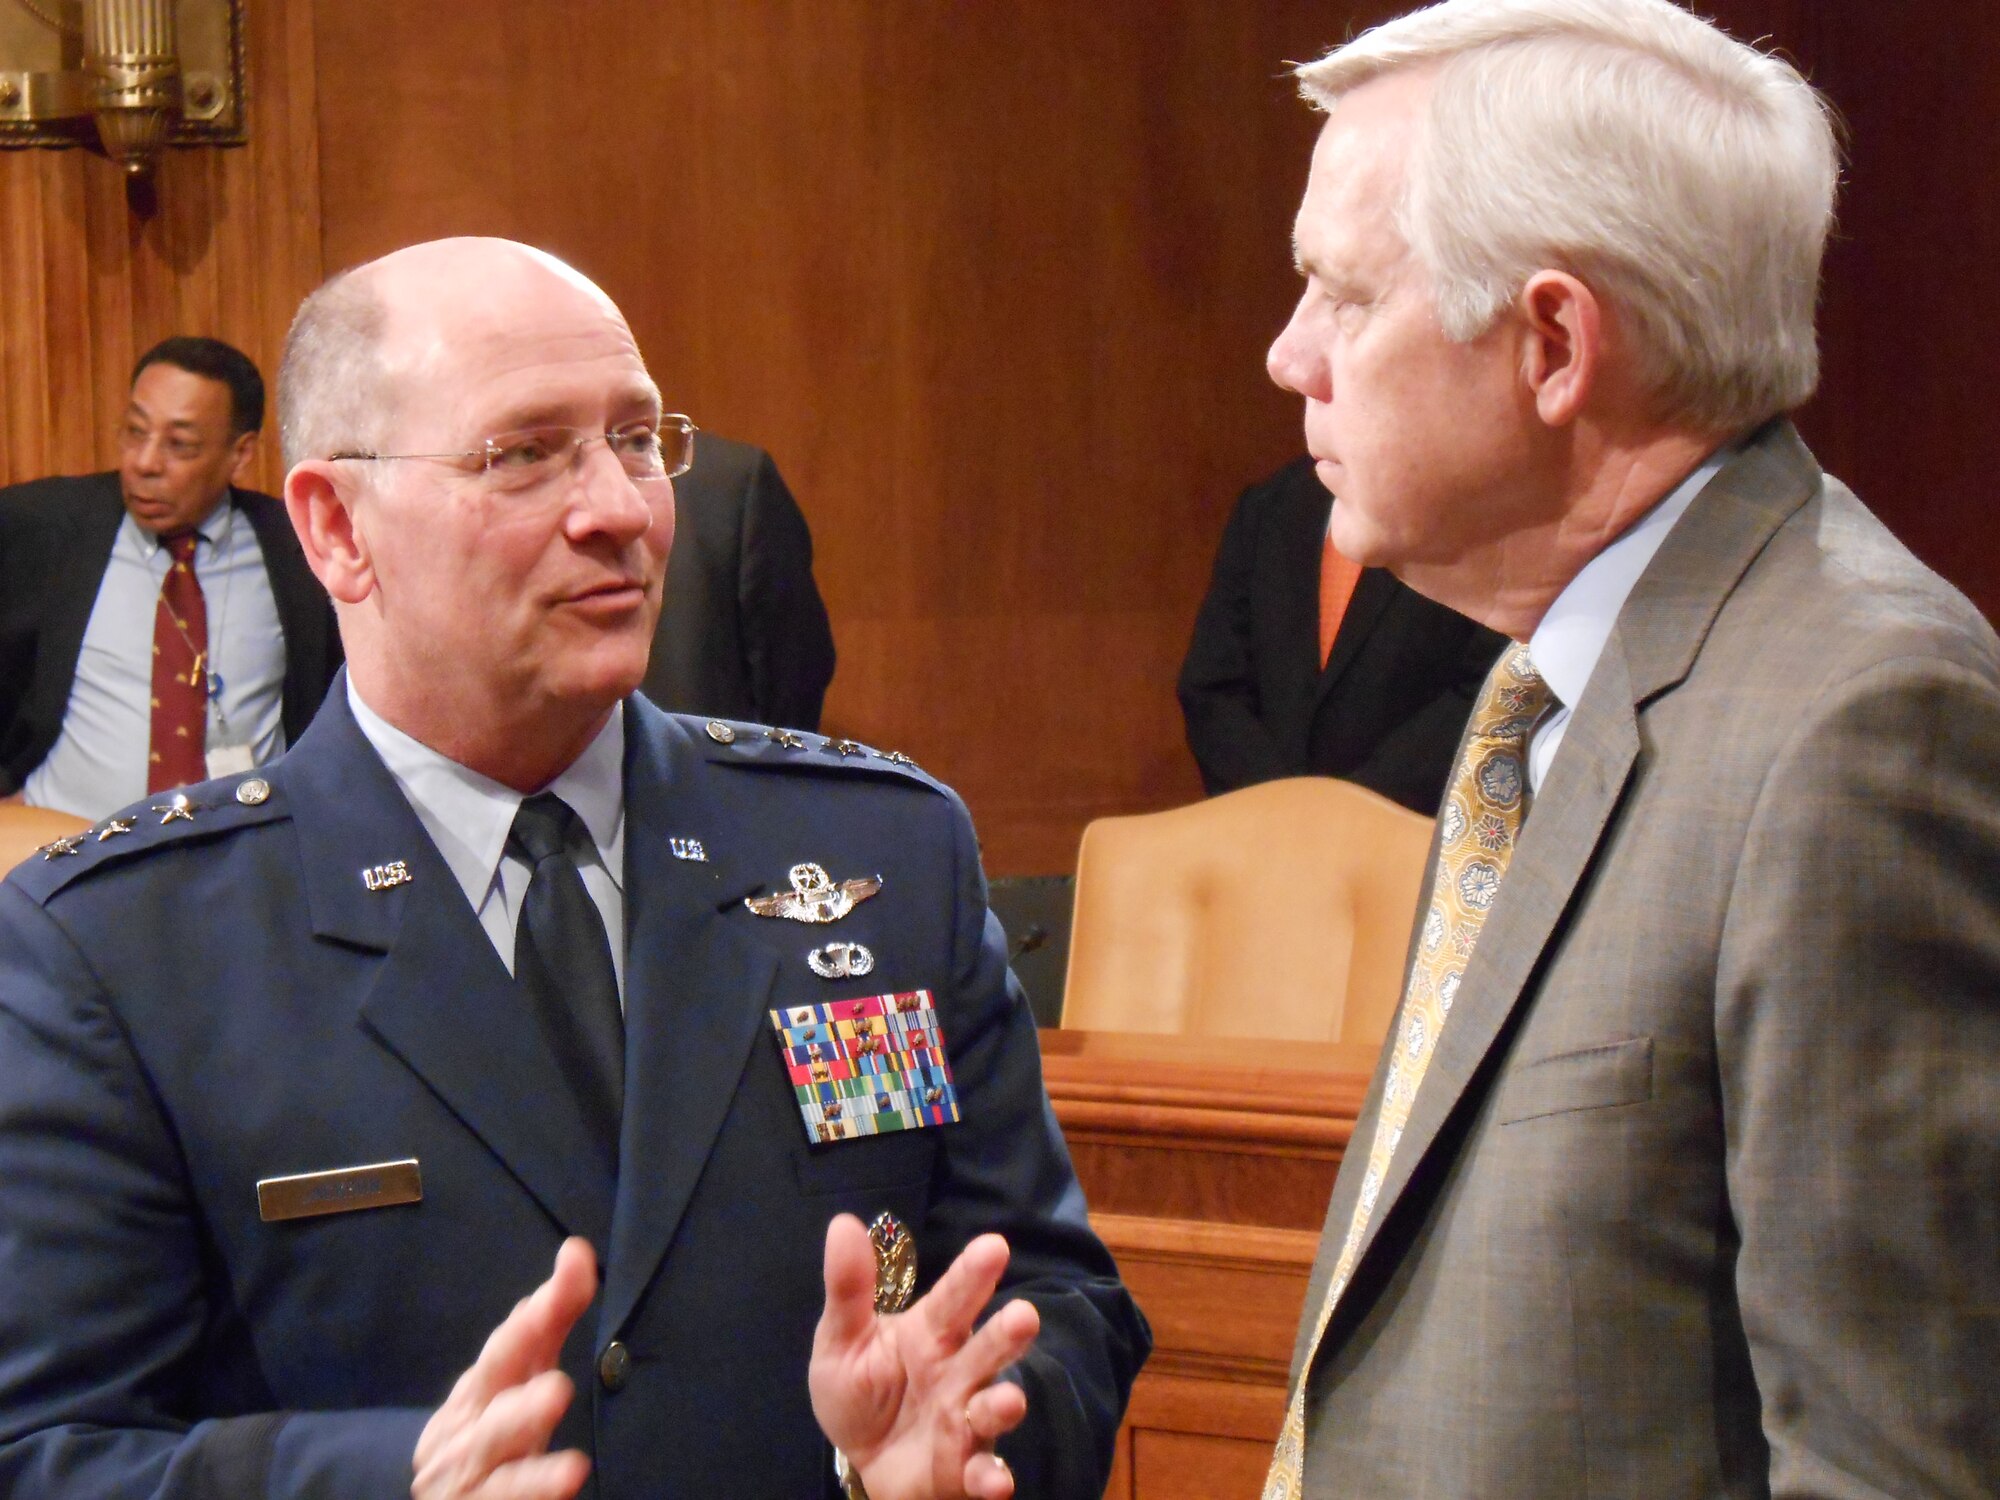 Lt. Gen. James F. Jackson (left) discusses the proposed fiscal 2014 budget of the Air Force Reserve with retired Air Force Maj. Gen. Tom Carter April 17, 2013, on Capitol Hill in Washington, D.C. The top leaders from Army, Navy, Marine and Air Force Reserve and National Guard programs provided statements and answered questions regarding the estimates for next year's funding at the U.S. Senate Committee on Appropriations Subcommittee on Defense. (U.S. Air Force photo/Col. Bob Thompson)